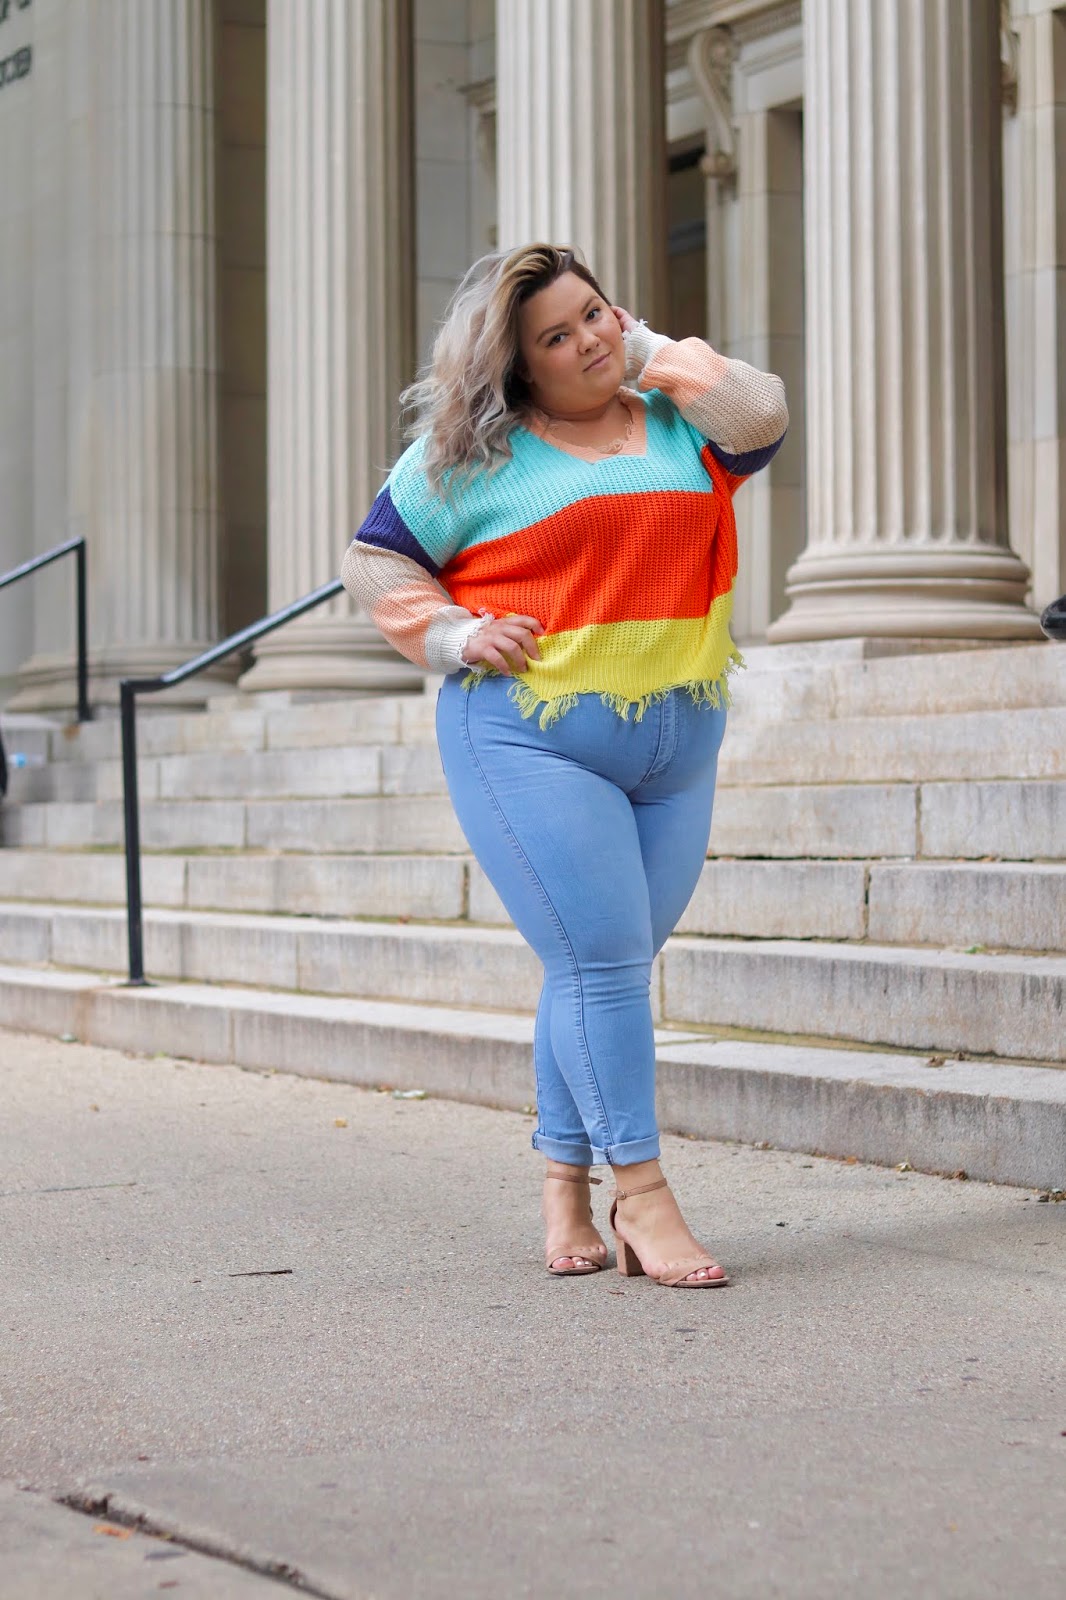 Chicago Plus Size Petite Fashion Blogger, influencer, YouTuber, and model Natalie Craig, of Natalie in the City, rocks sweaters and fall fashion from Gordmans, an off-price retailer.